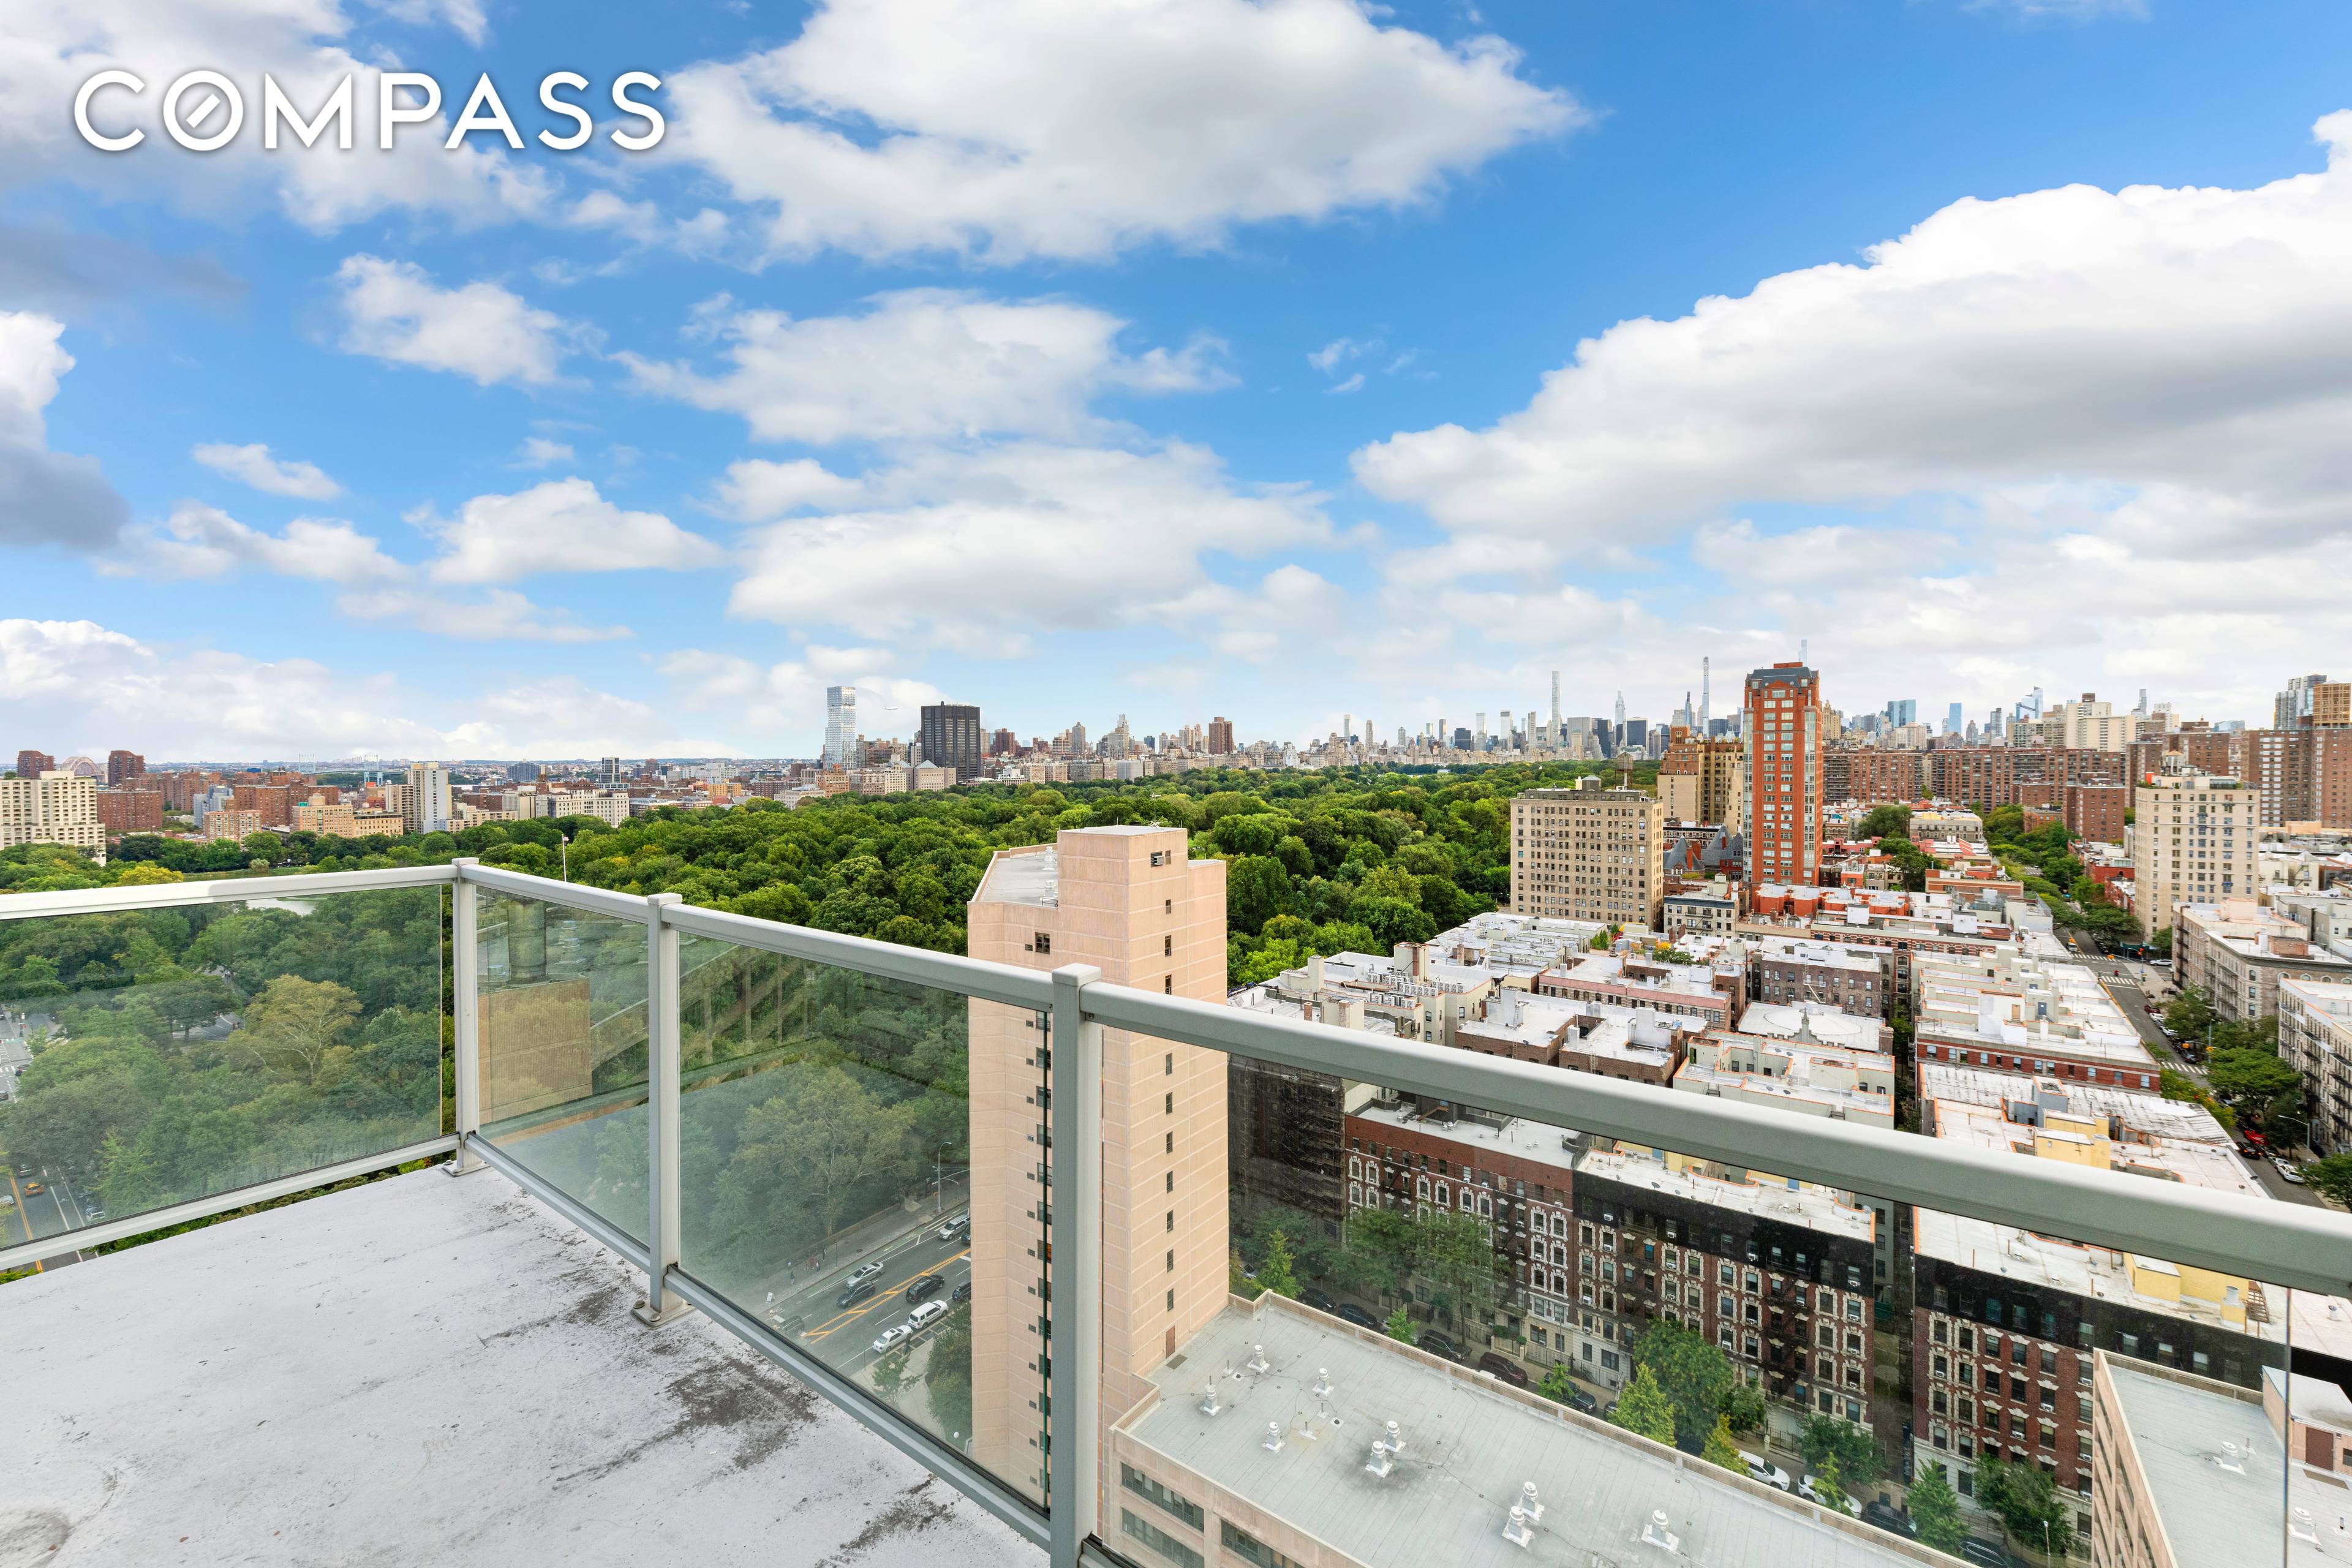 Perfectly situated on the southeast corner, this 3 bedroom 2 bathroom home has breathtaking, unobstructed views of both Morningside Park and Central Park.